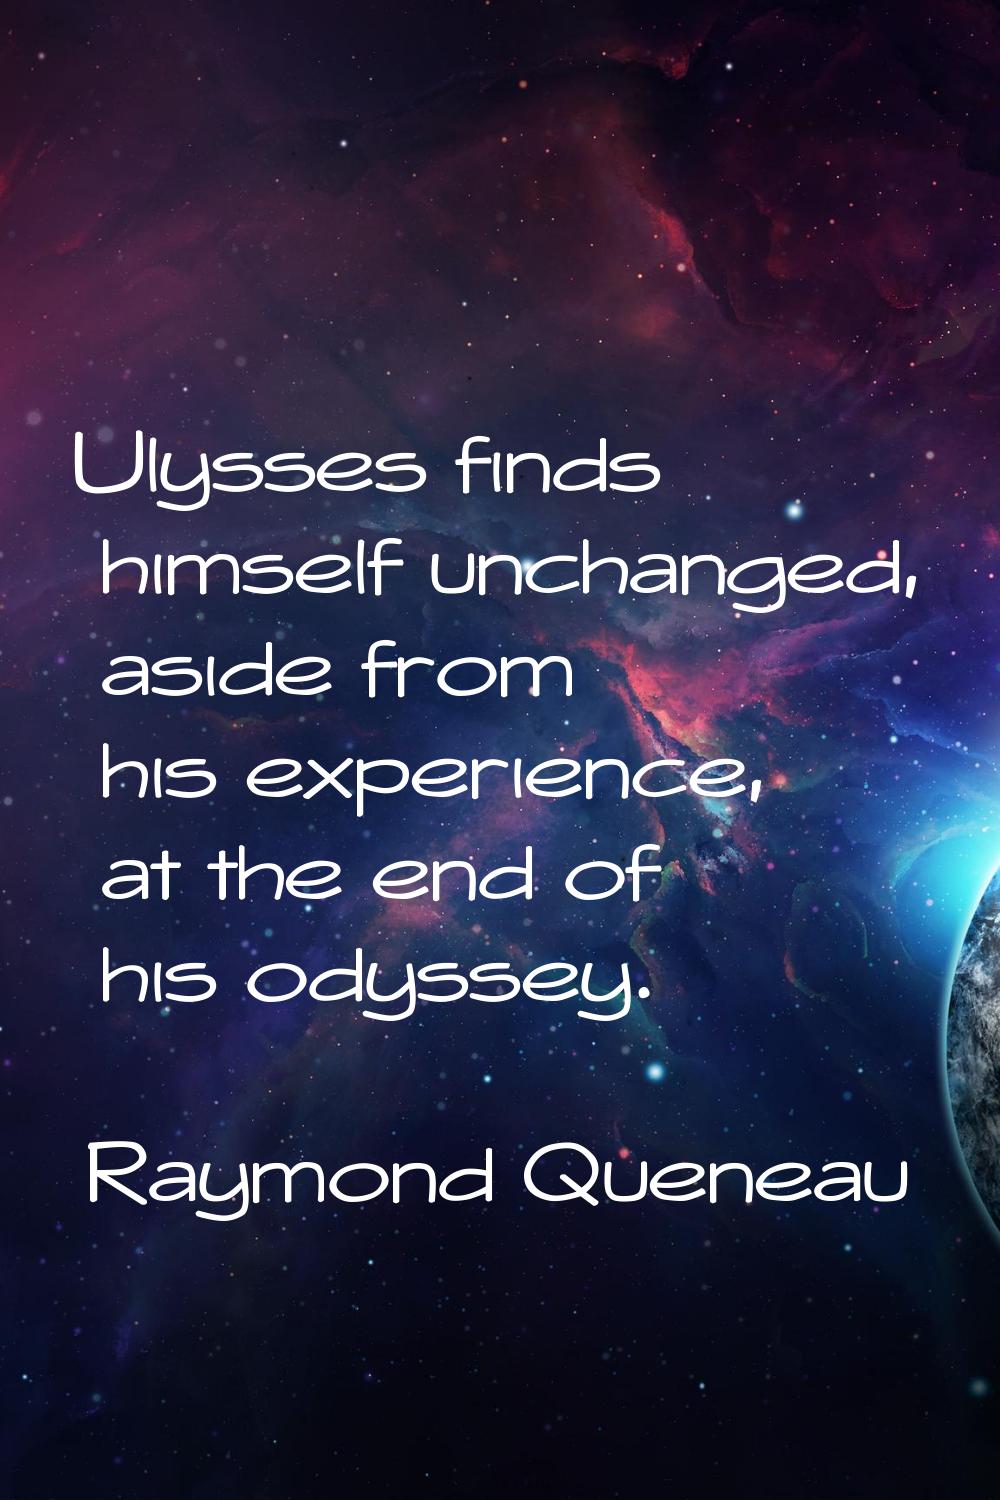 Ulysses finds himself unchanged, aside from his experience, at the end of his odyssey.